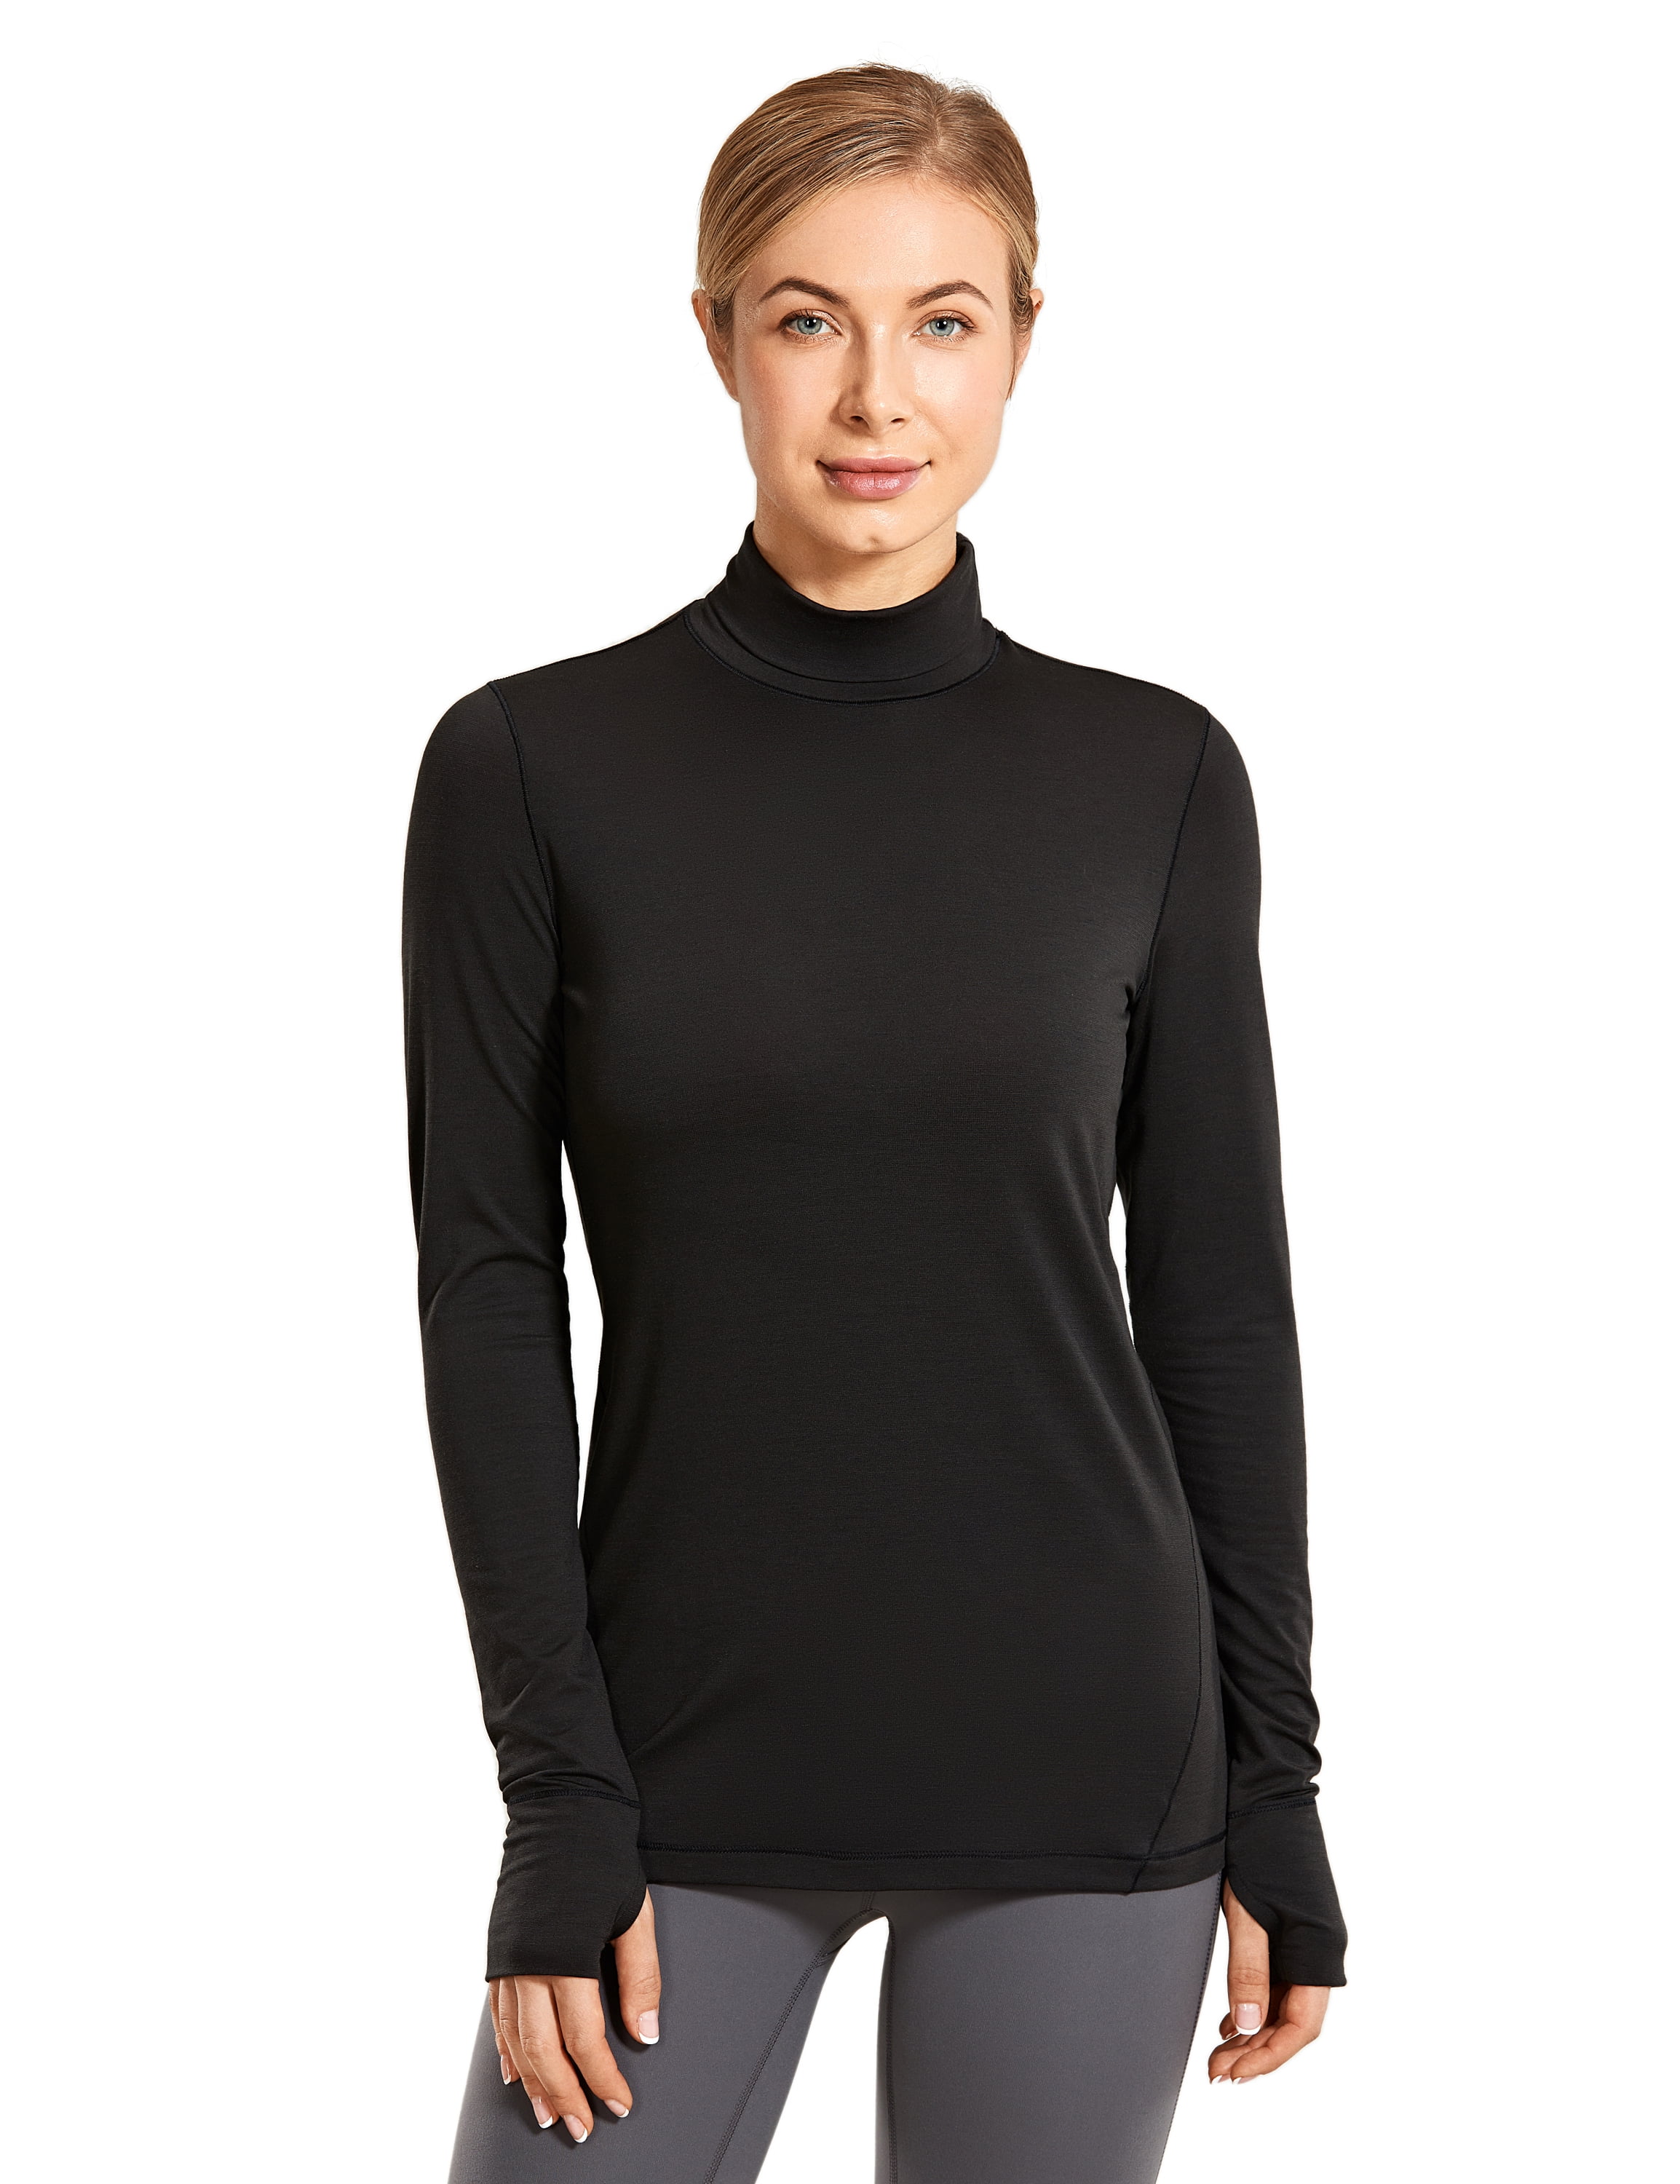 CRZ YOGA Women's Lightweight Long Sleeve Shirts Mock Turtleneck Pullover Lounge Workout Layer Tops with Thumbholes 